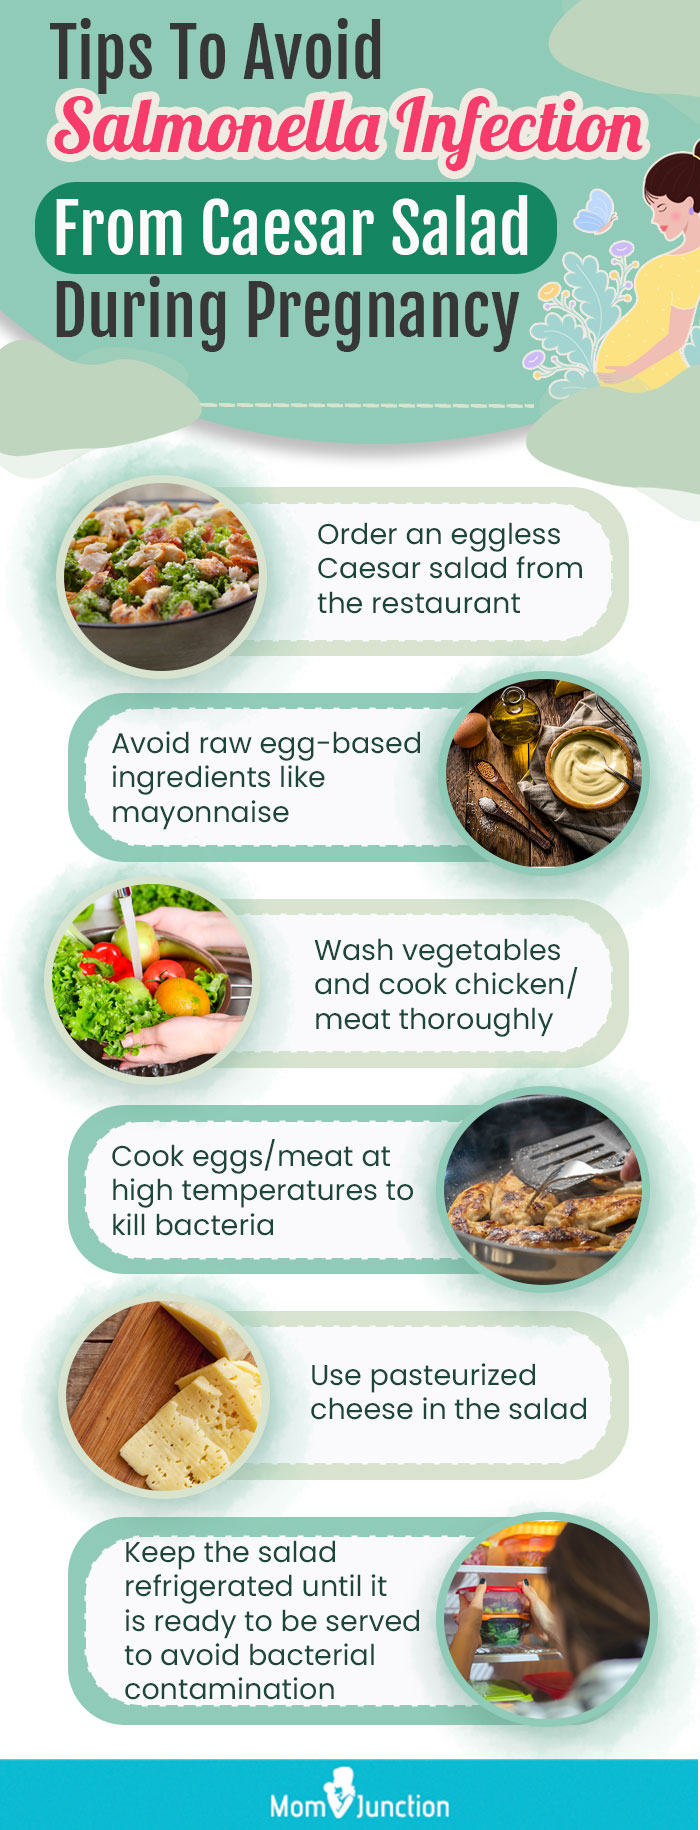 tips to avoid salmonella infection from caesar salad during pregnancy (infographic)